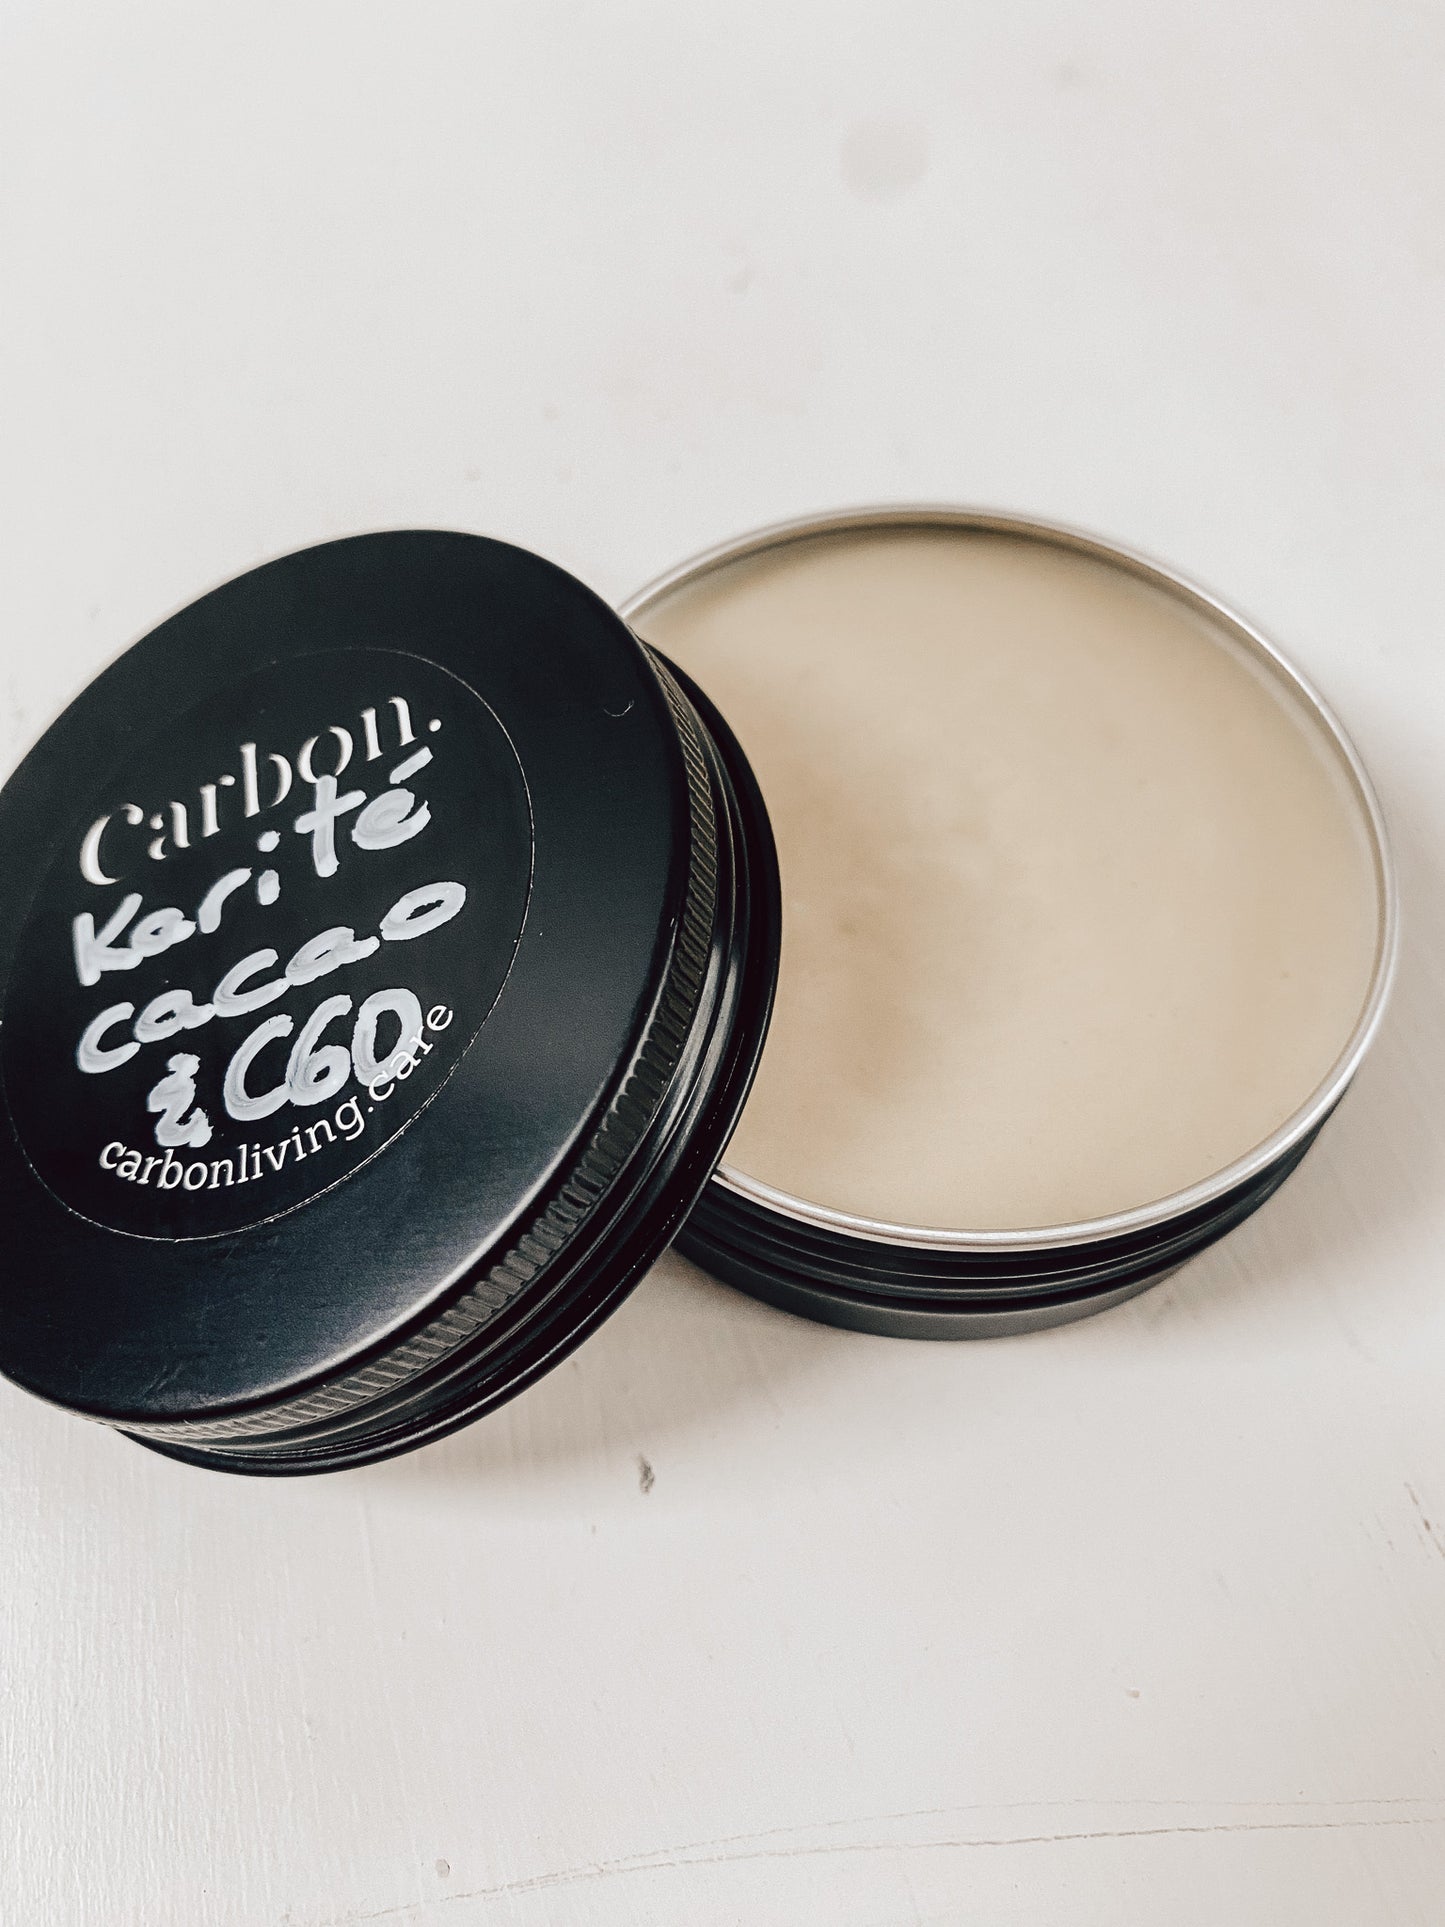 Whipped shea butter, cocoa & C60